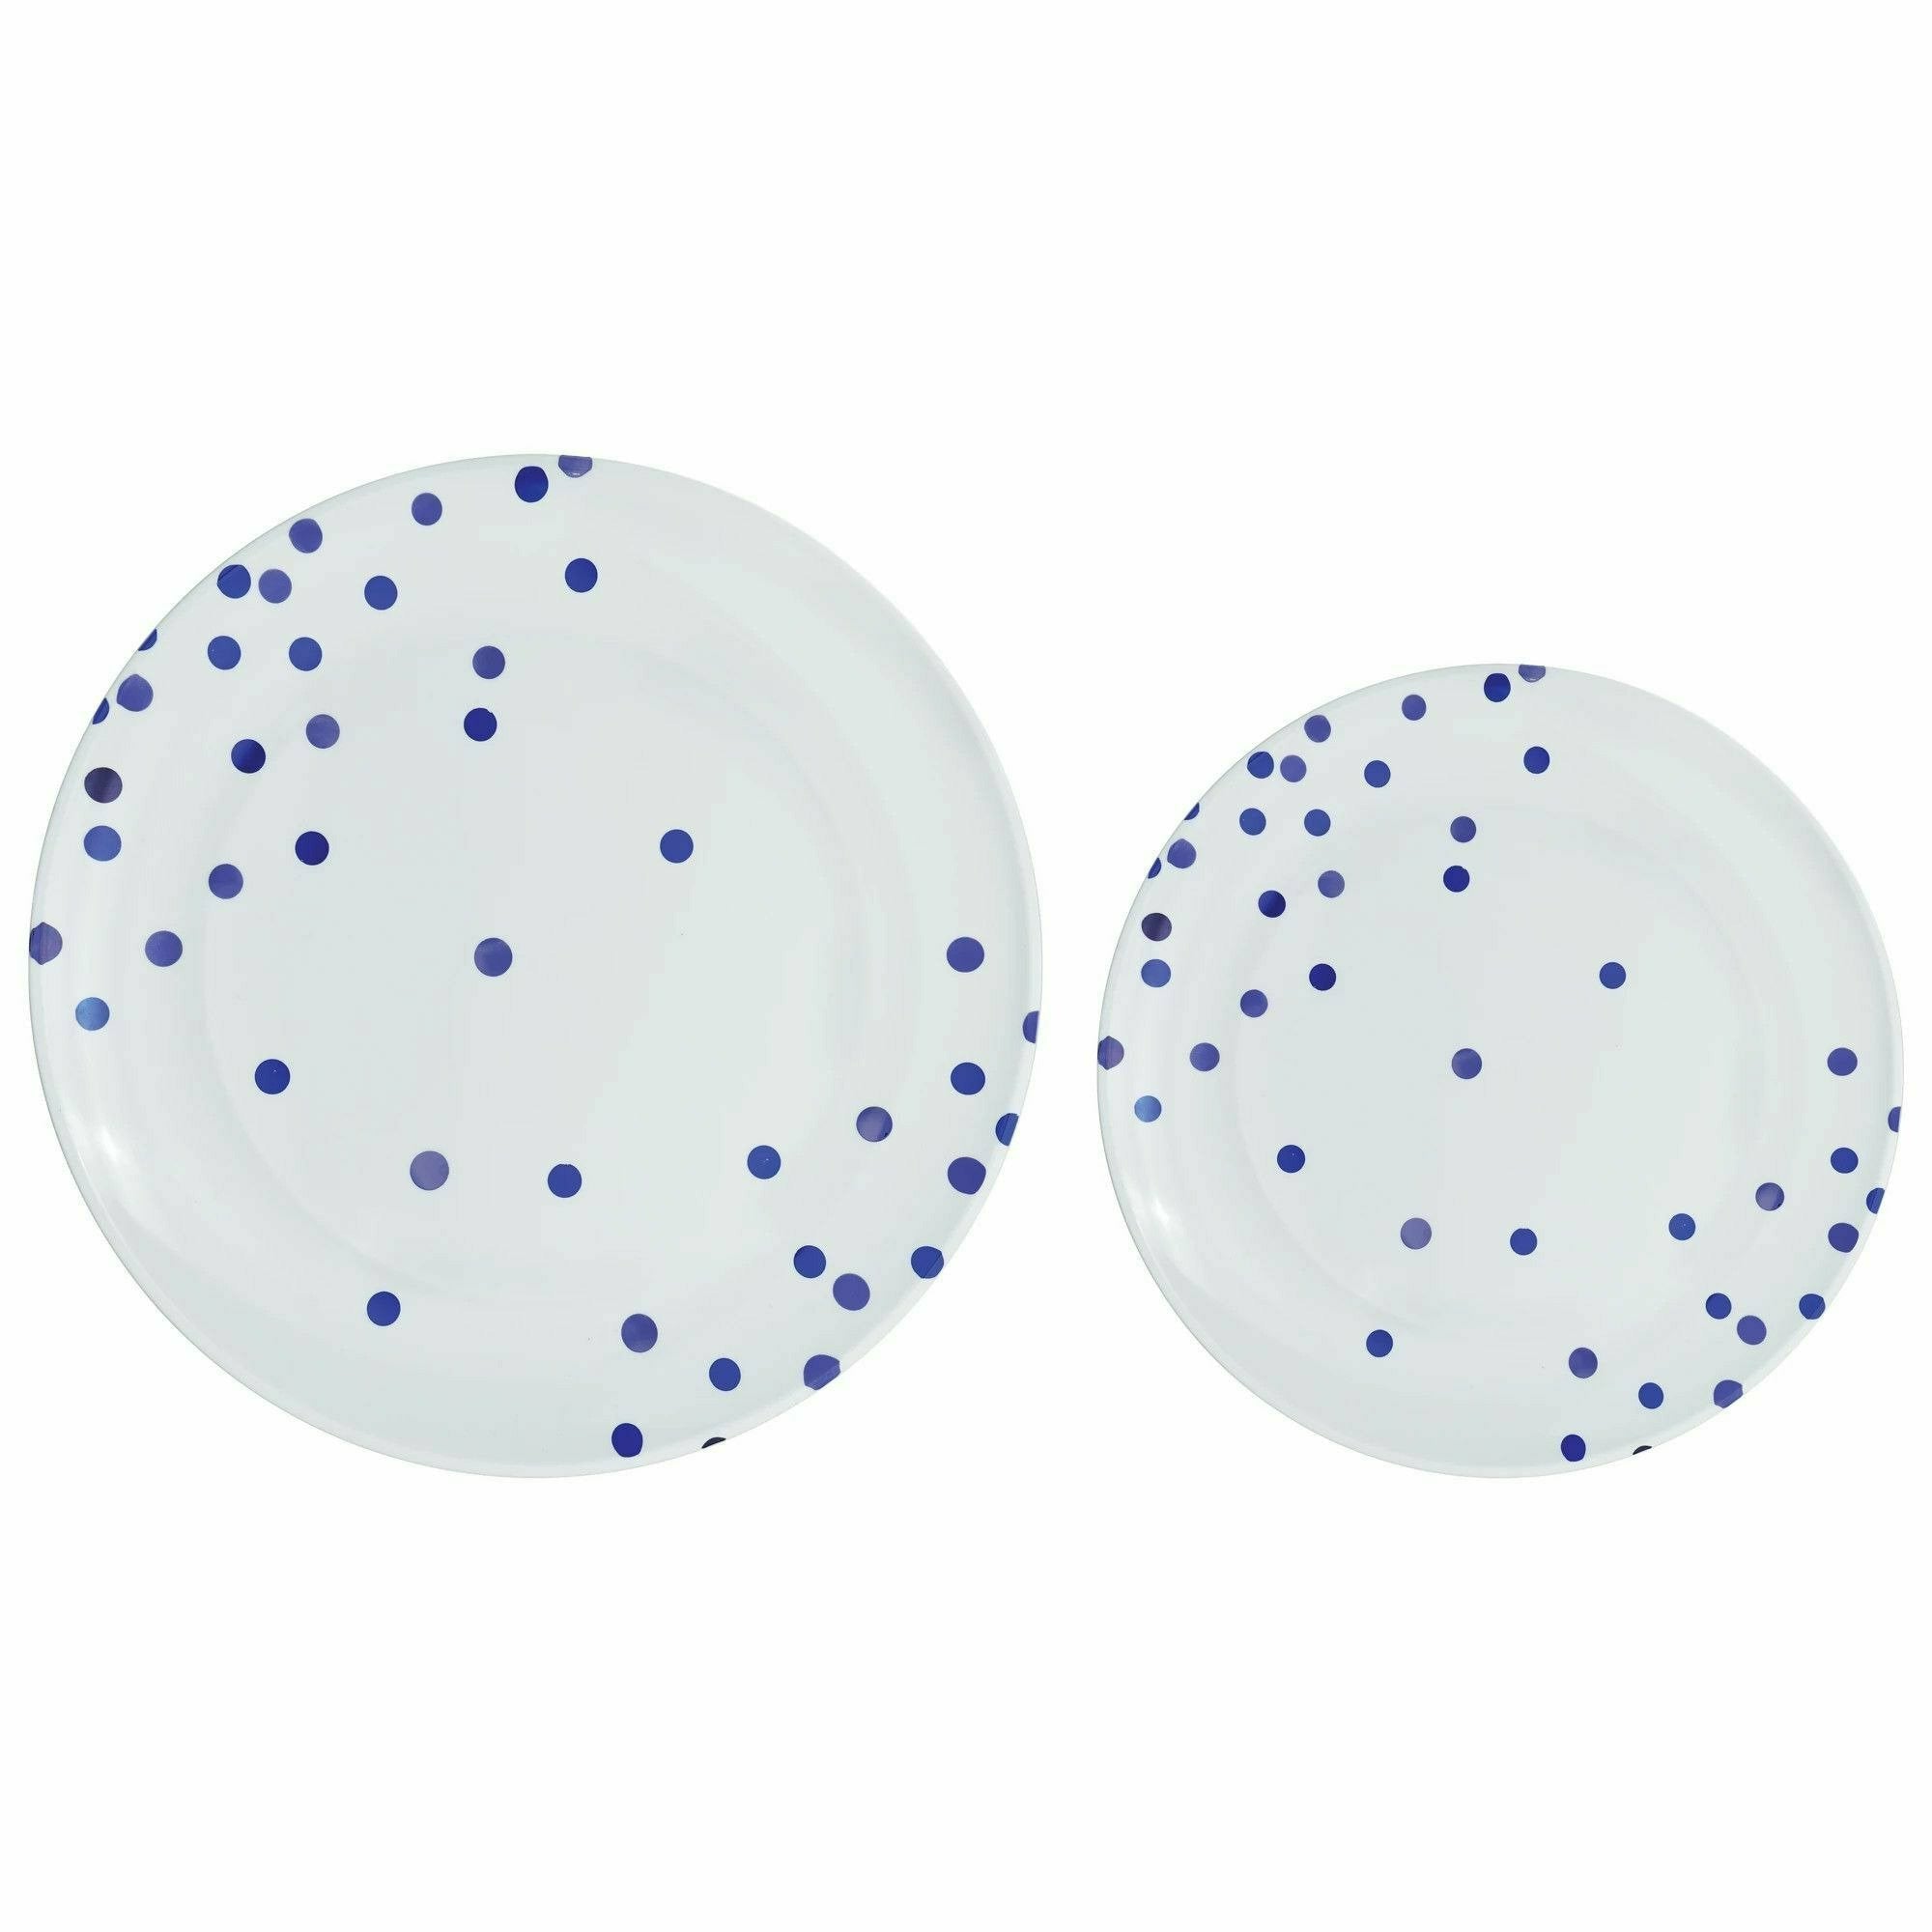 Amscan BASIC Bright Royal Blue/True Navy - Multipack, Hot Stamped Plastic Plates